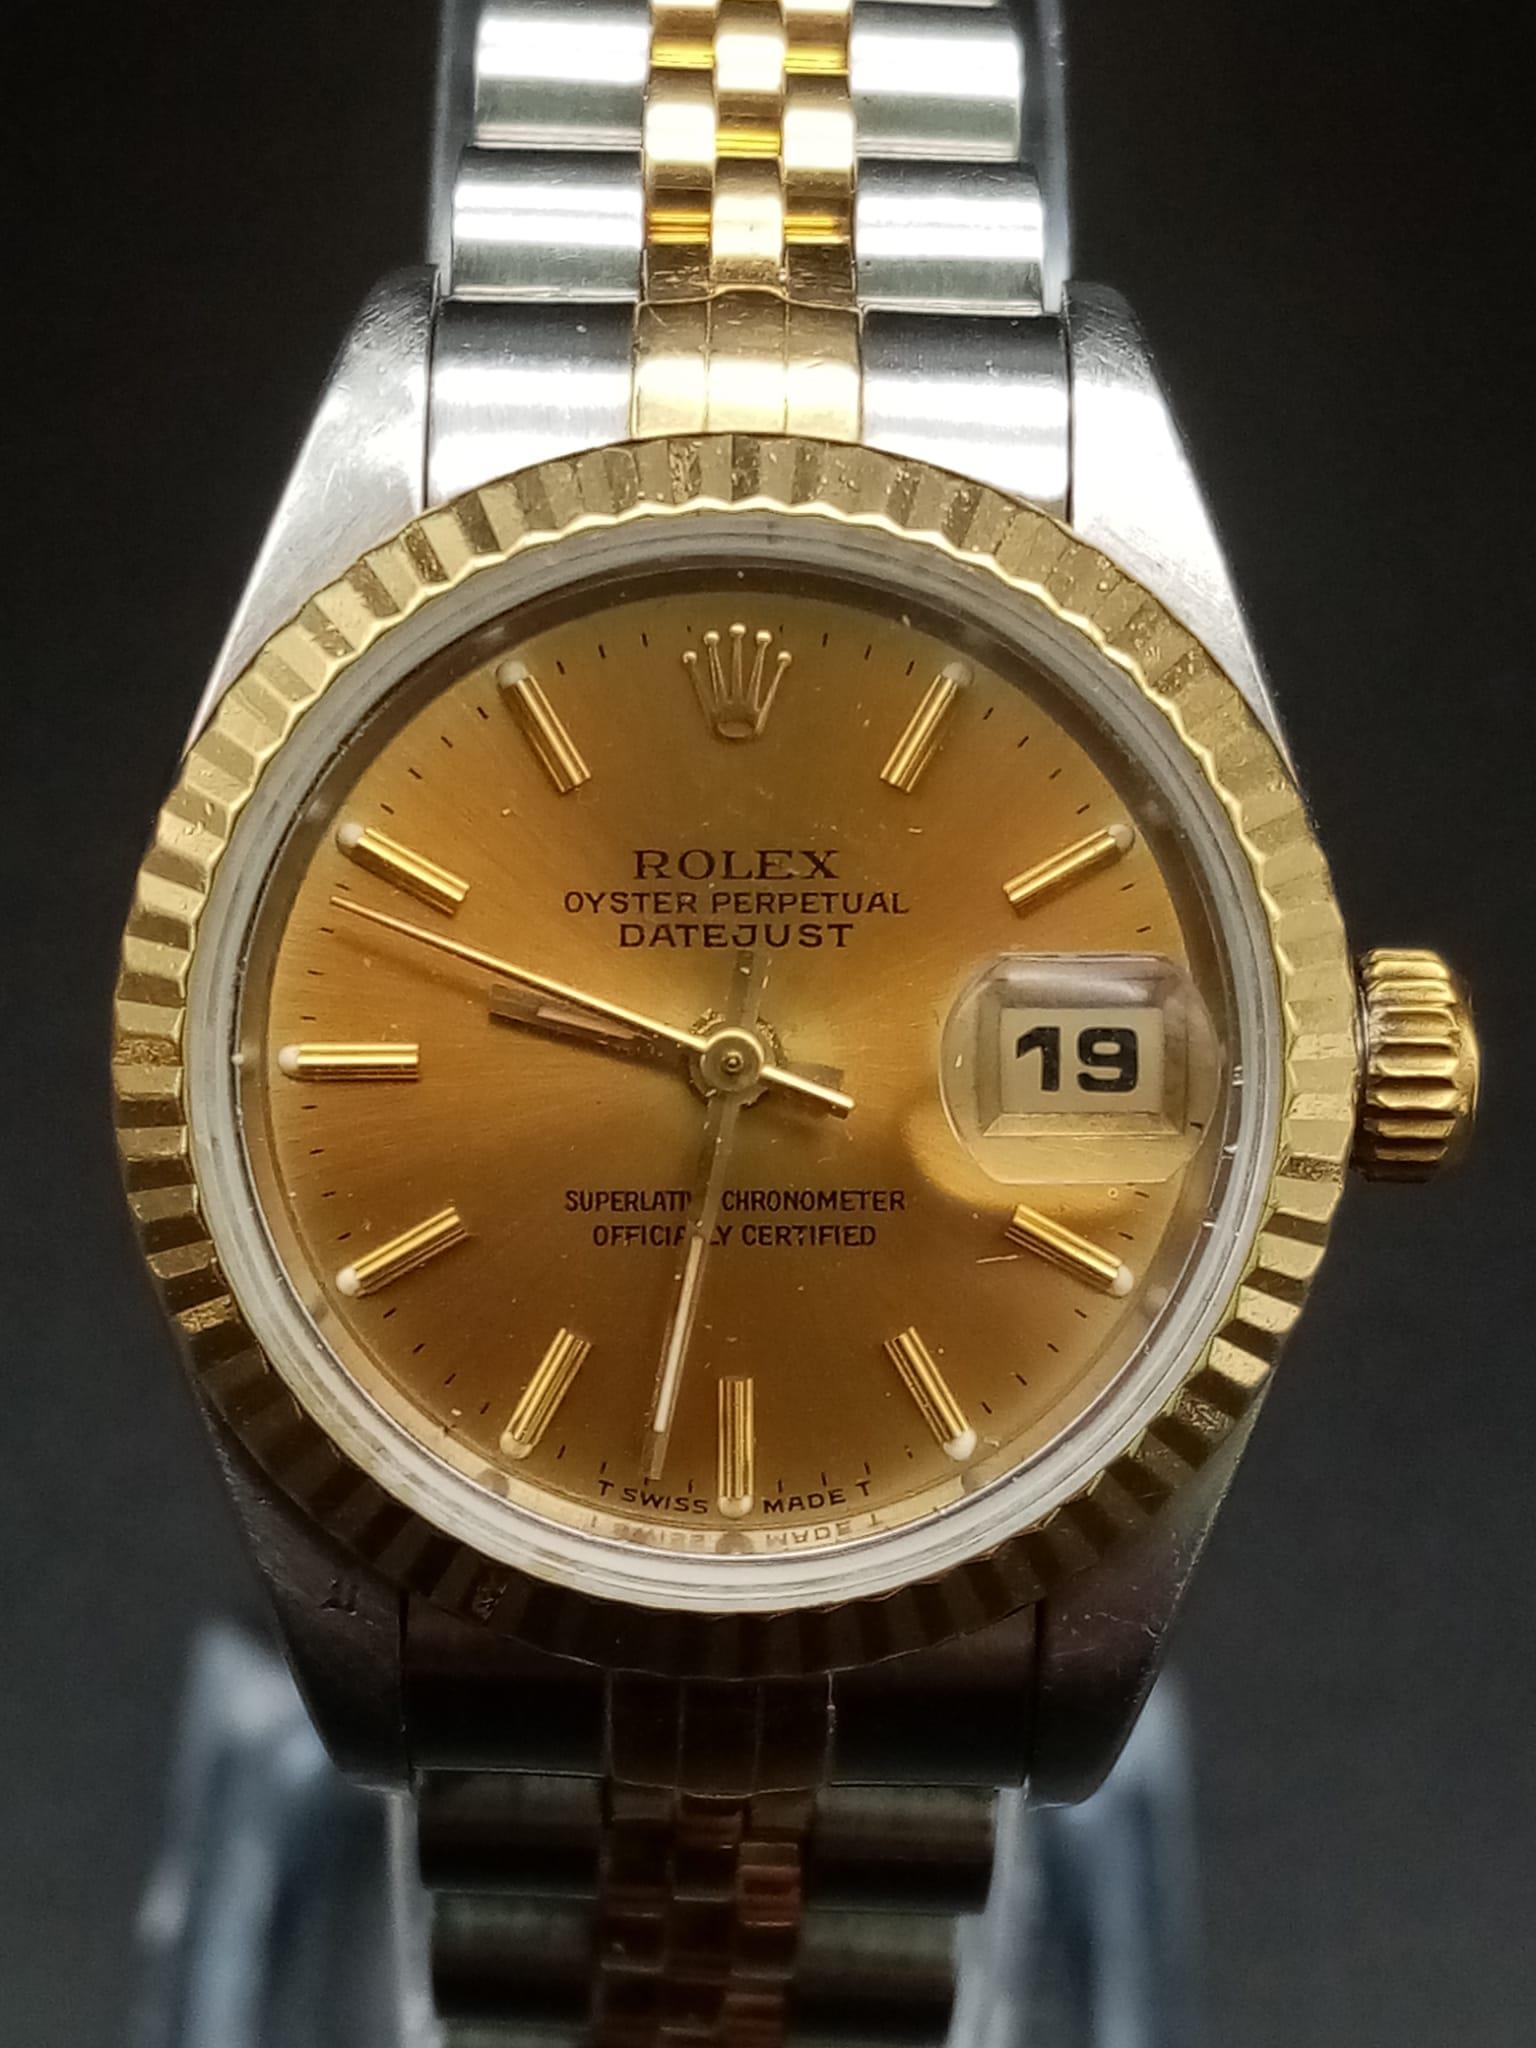 A Rolex Oyster Perpetual Datejust Ladies Watch. Bi-metal strap and case - 26mm. Gold tone dial